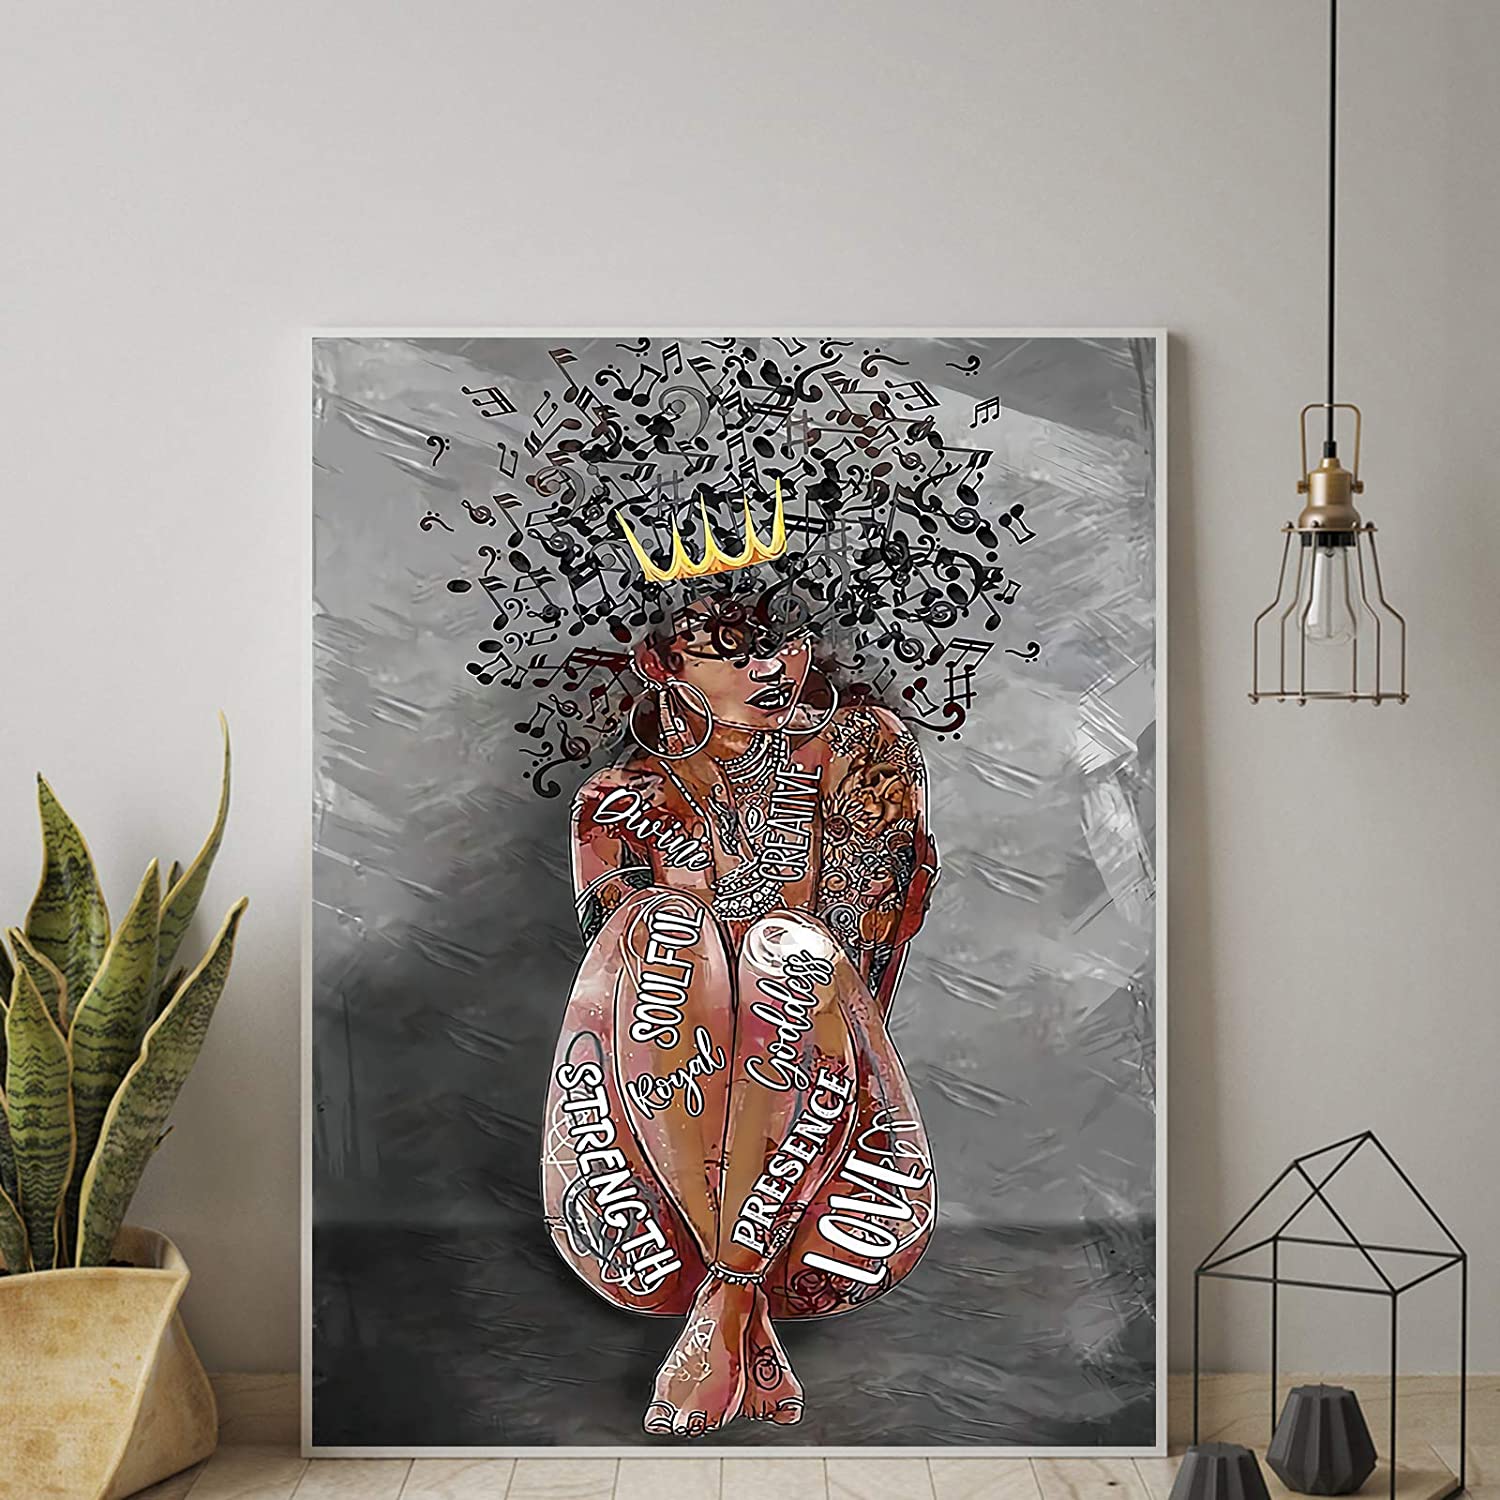 Black Girl Canvas, Black Queen Wall Art Africa America Poster Black Woman Love Music Canvas Wall Art Abstract Contemporary Canvas Matte Prints Painting Home Decor For Bedroom Living Room